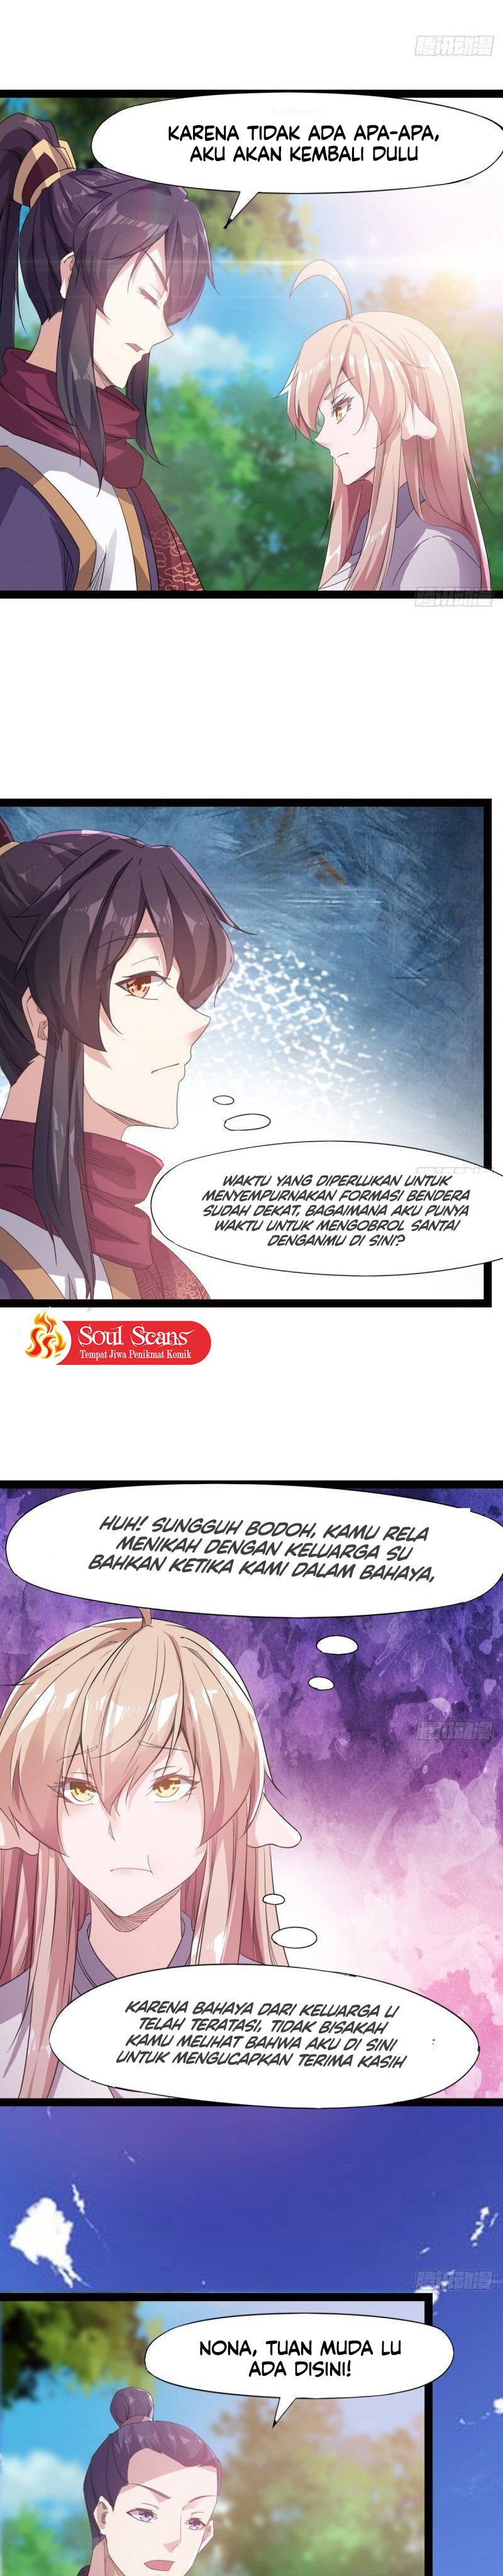 Path Of The Sword Chapter 26